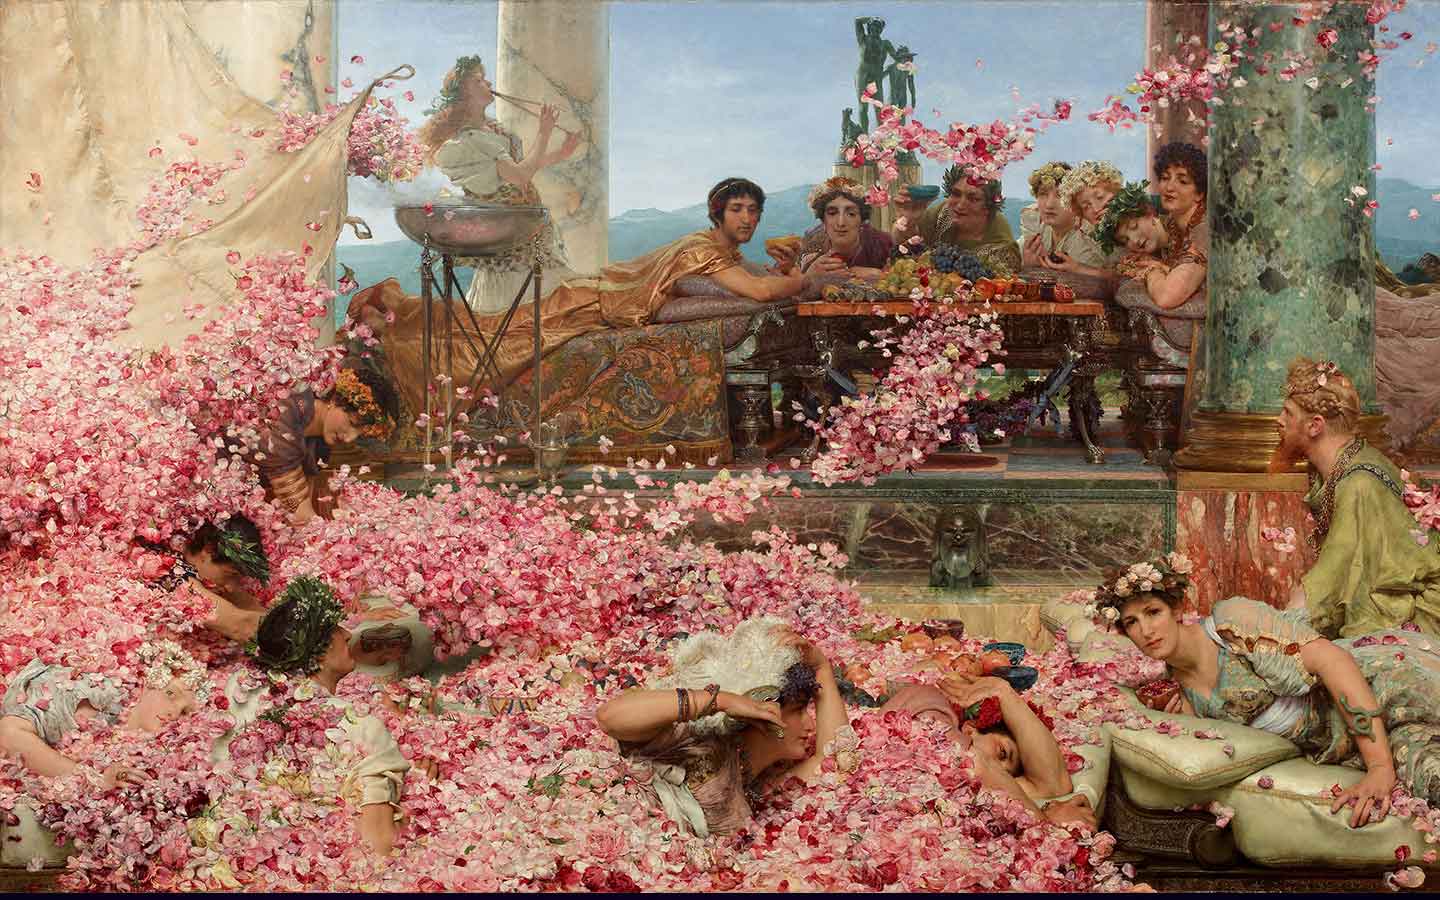 The Roses of Heliogabalus by Sir Lawrence Alma-Tadema